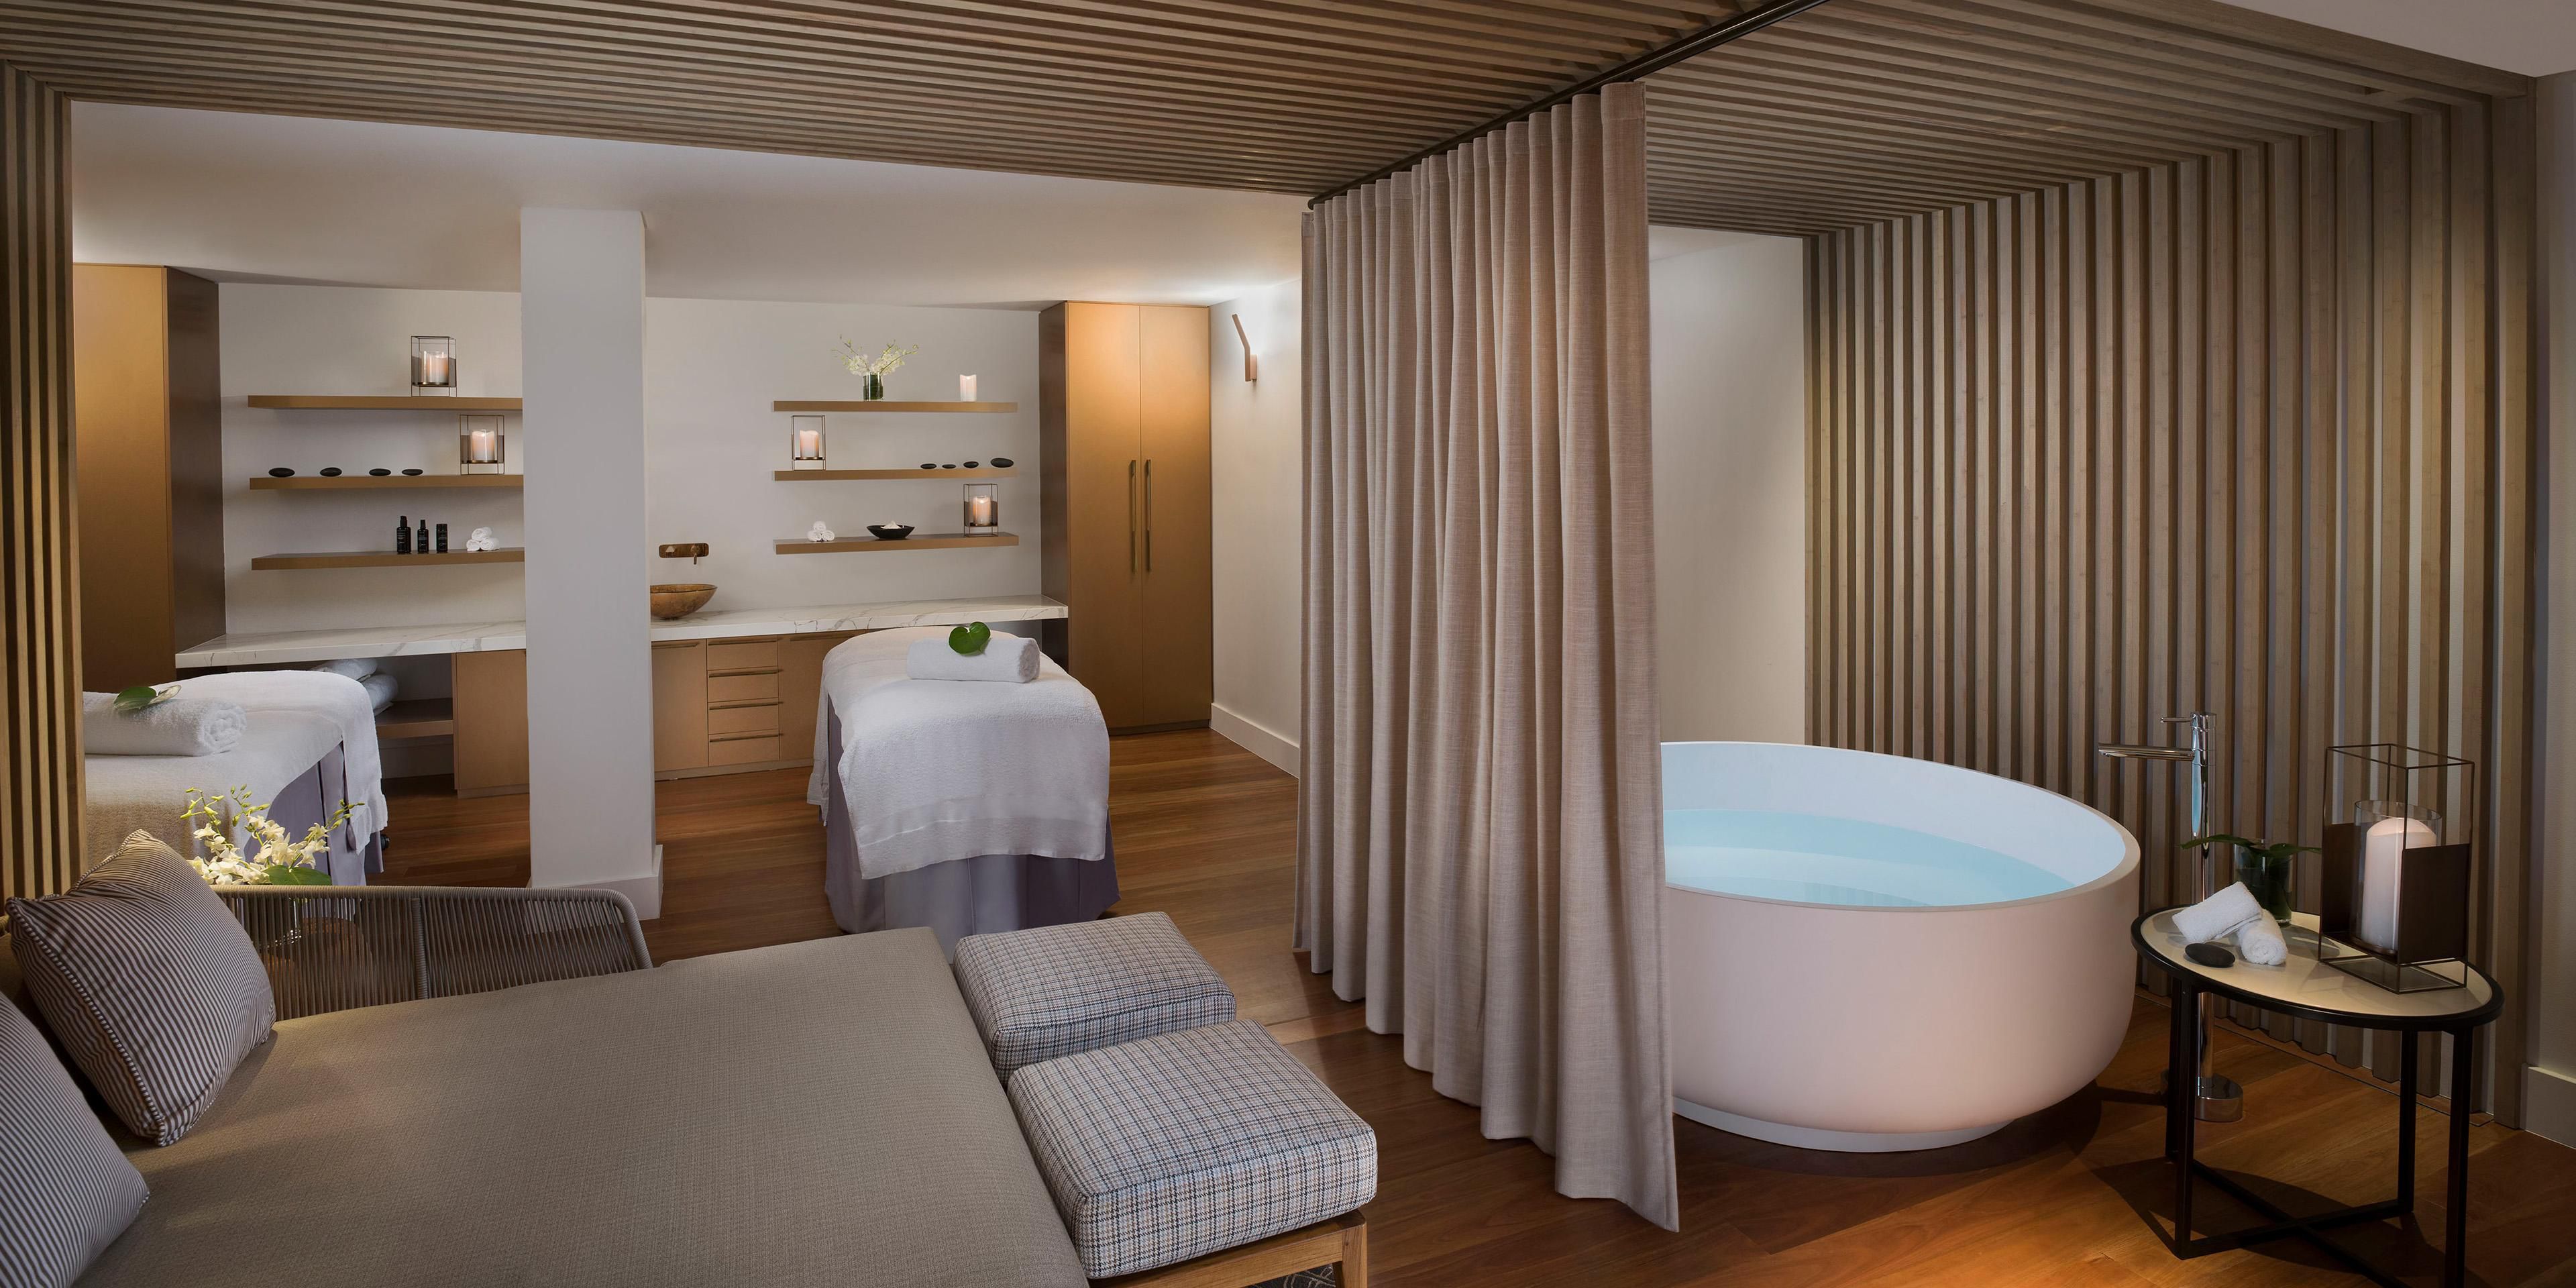 Leave the world behind as you enter a timeless, serene haven in the Resort’s luxurious wellness destination. Guests will retreat into an intimate, indulgent environment with all-new treatment rooms, couples' room, sauna and steam facilities nestled in the natural surrounds of Hayman Island.